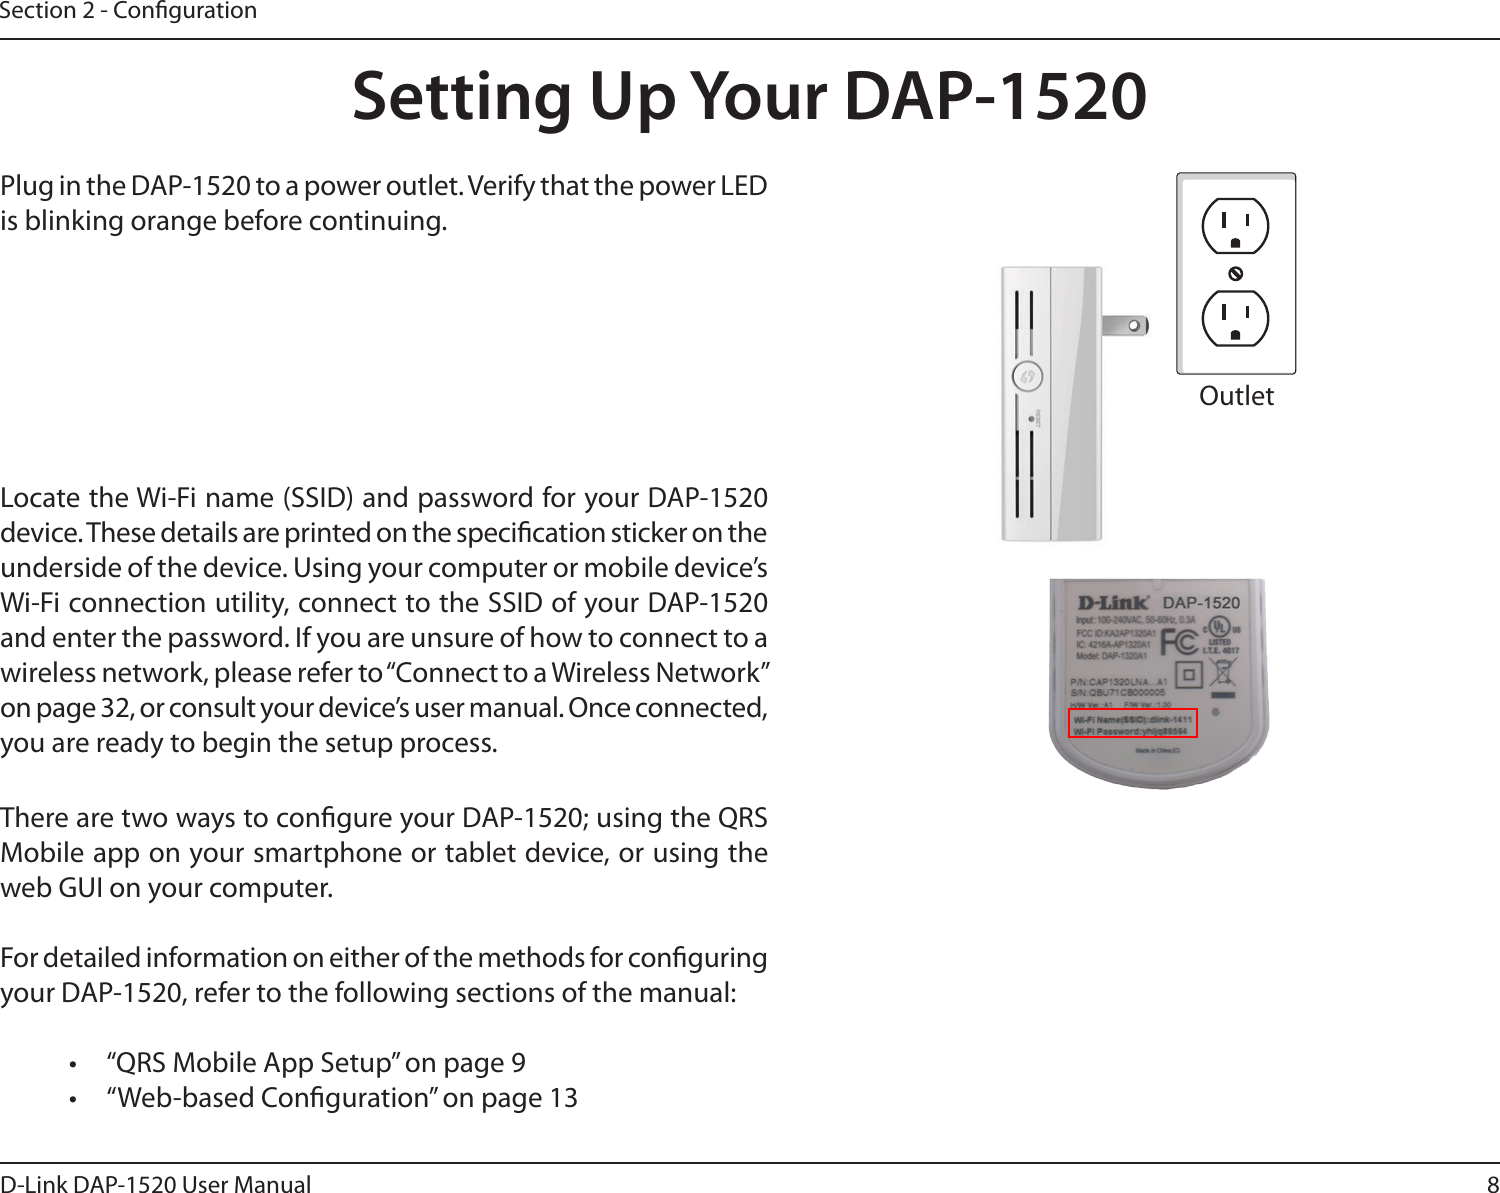 8D-Link DAP-1520 User ManualSection 2 - CongurationSetting Up Your DAP-1520Plug in the DAP-1520 to a power outlet. Verify that the power LED is blinking orange before continuing.OutletEthernetThere are two ways to congure your DAP-1520; using the QRS Mobile app on your smartphone or tablet device, or using the web GUI on your computer.For detailed information on either of the methods for conguring your DAP-1520, refer to the following sections of the manual:•  “QRS Mobile App Setup” on page 9•  “Web-based Conguration” on page 13Locate the Wi-Fi name (SSID) and password for your DAP-1520 device. These details are printed on the specication sticker on the underside of the device. Using your computer or mobile device’s Wi-Fi connection utility, connect to the SSID of your DAP-1520 and enter the password. If you are unsure of how to connect to a wireless network, please refer to “Connect to a Wireless Network” on page 32, or consult your device’s user manual. Once connected, you are ready to begin the setup process. 